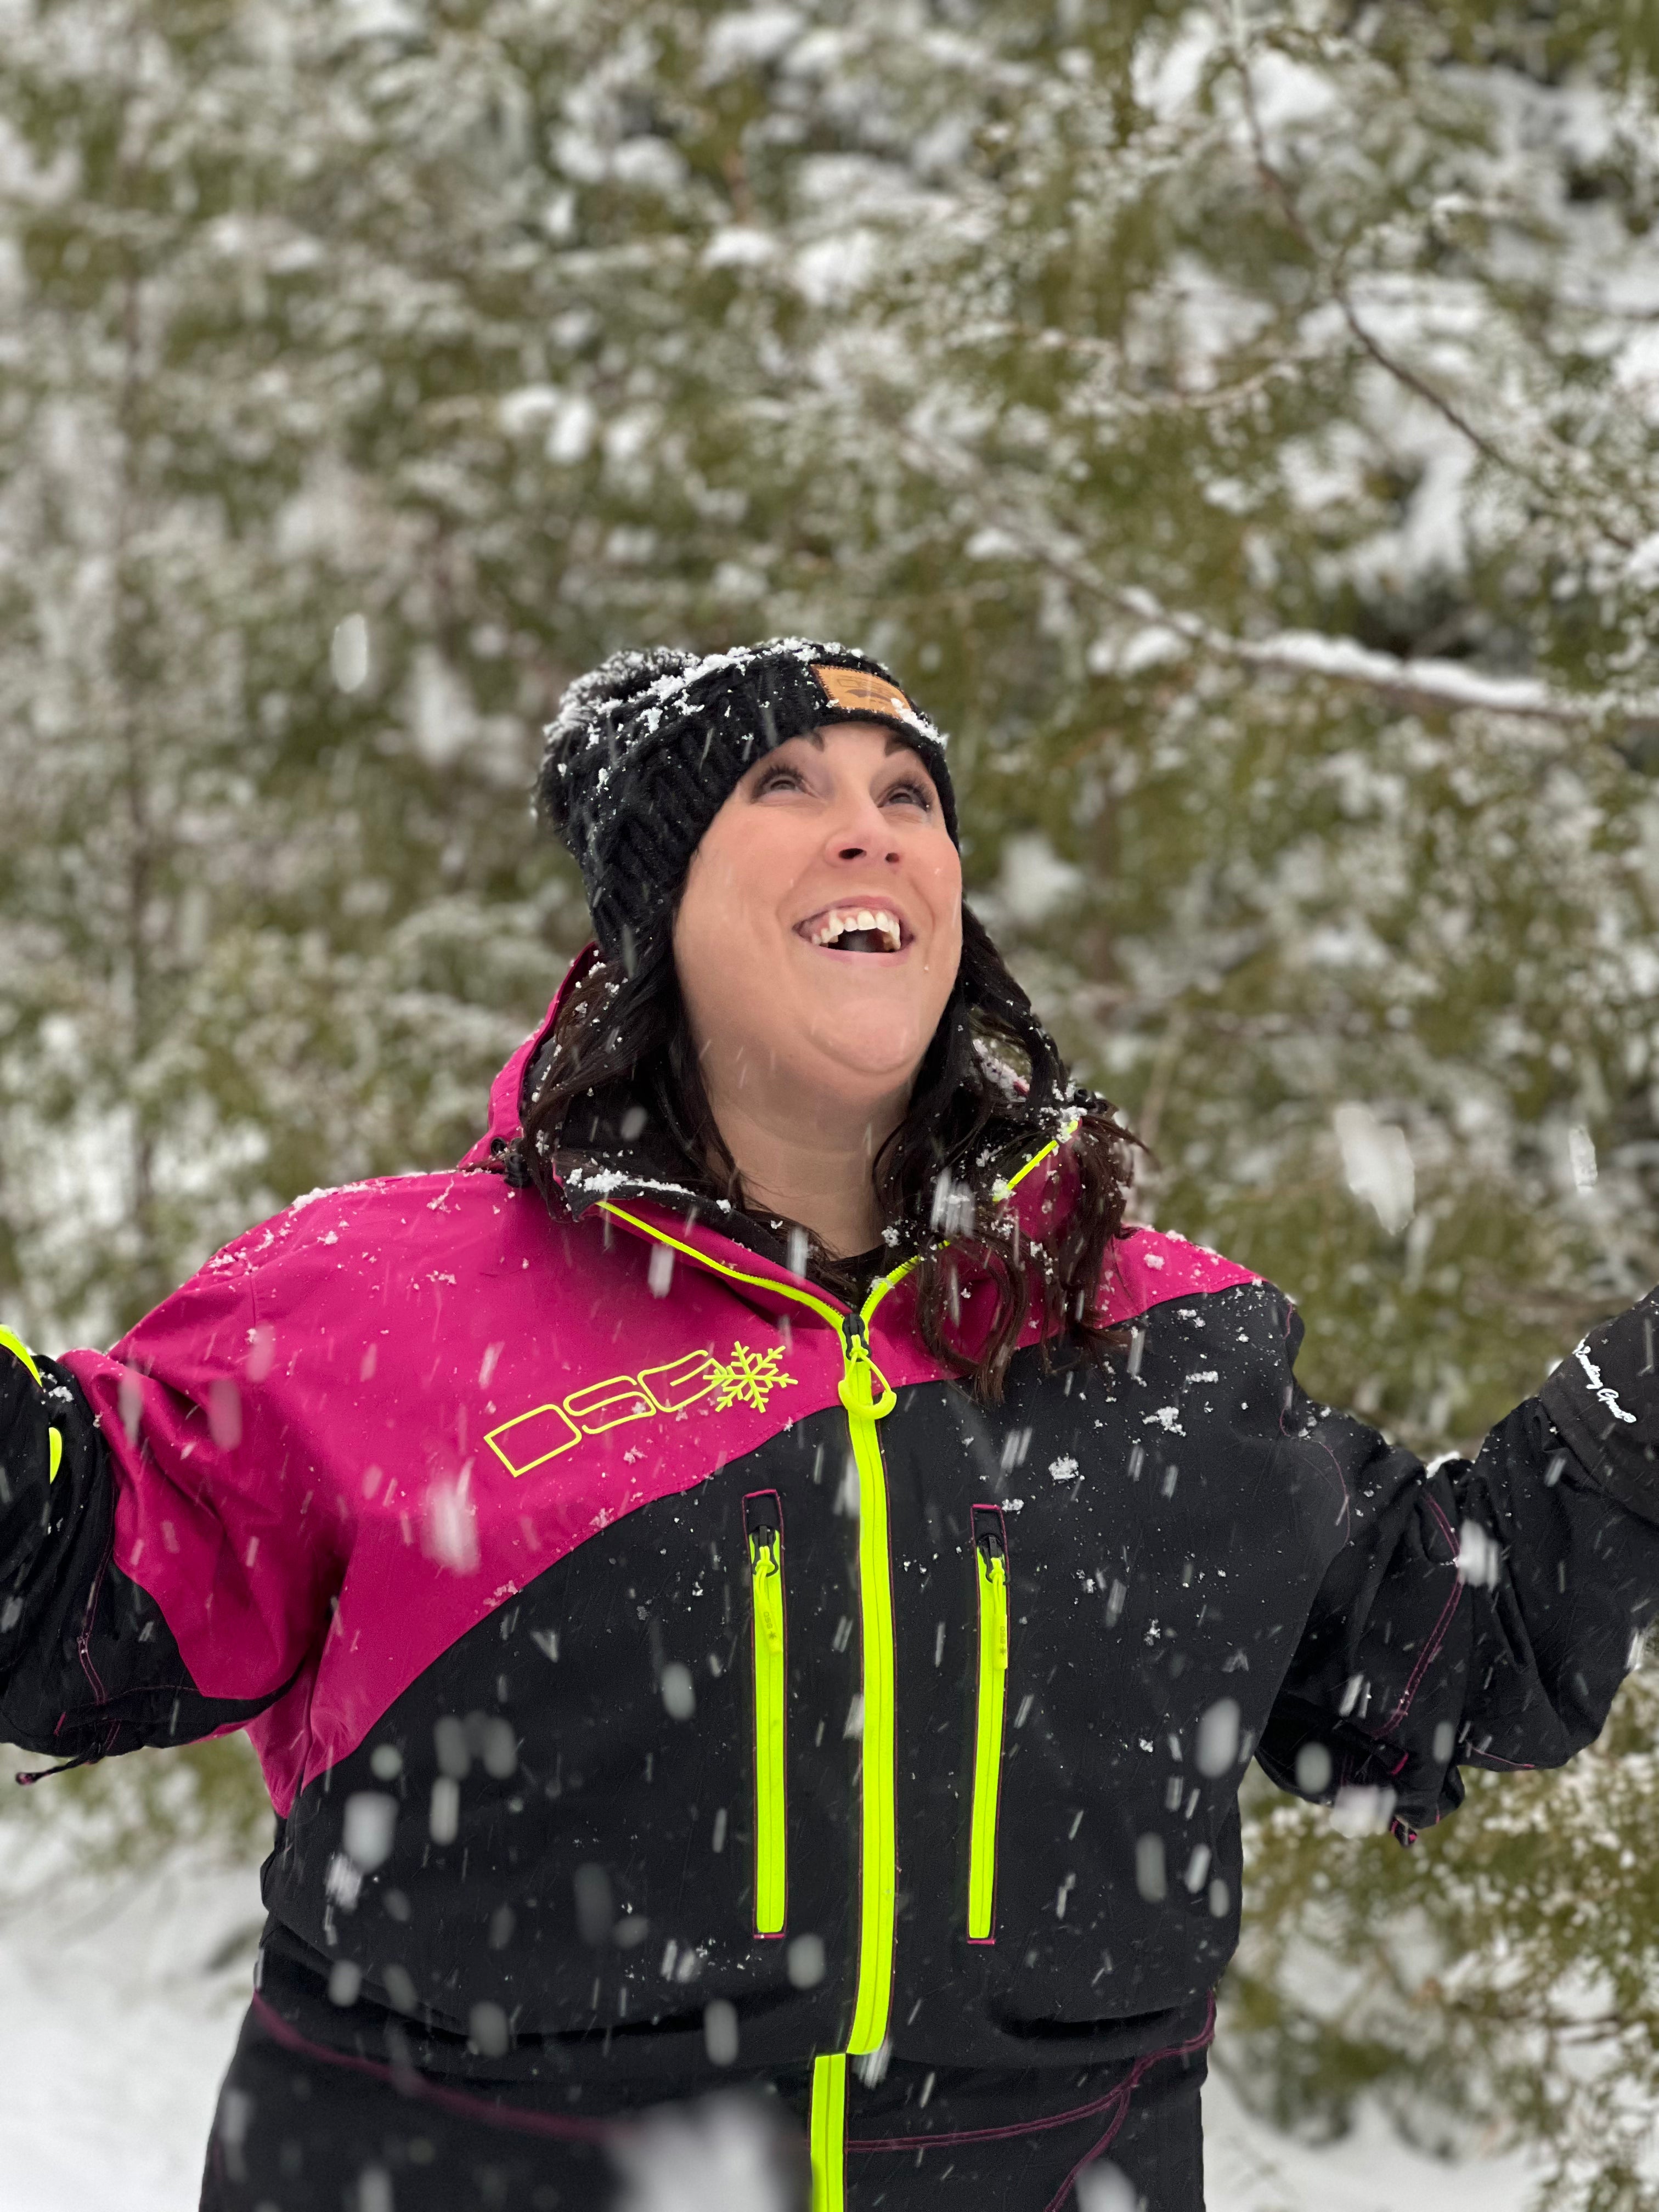 Plus size woman looking up at the sky while it's snowing and smiling